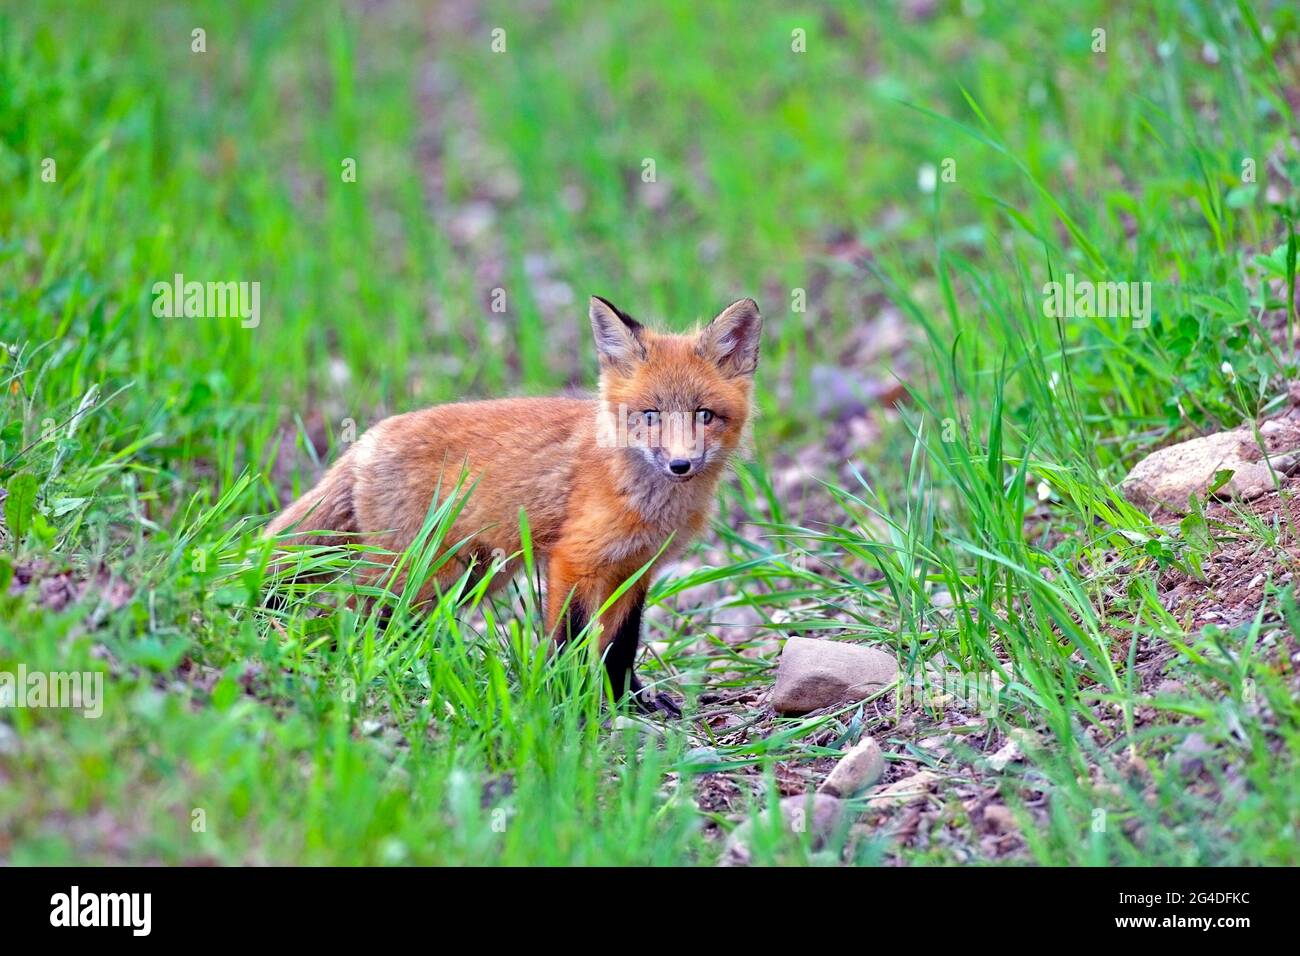 Curious Baby Red Fox standing in grass, watching Stock Photo